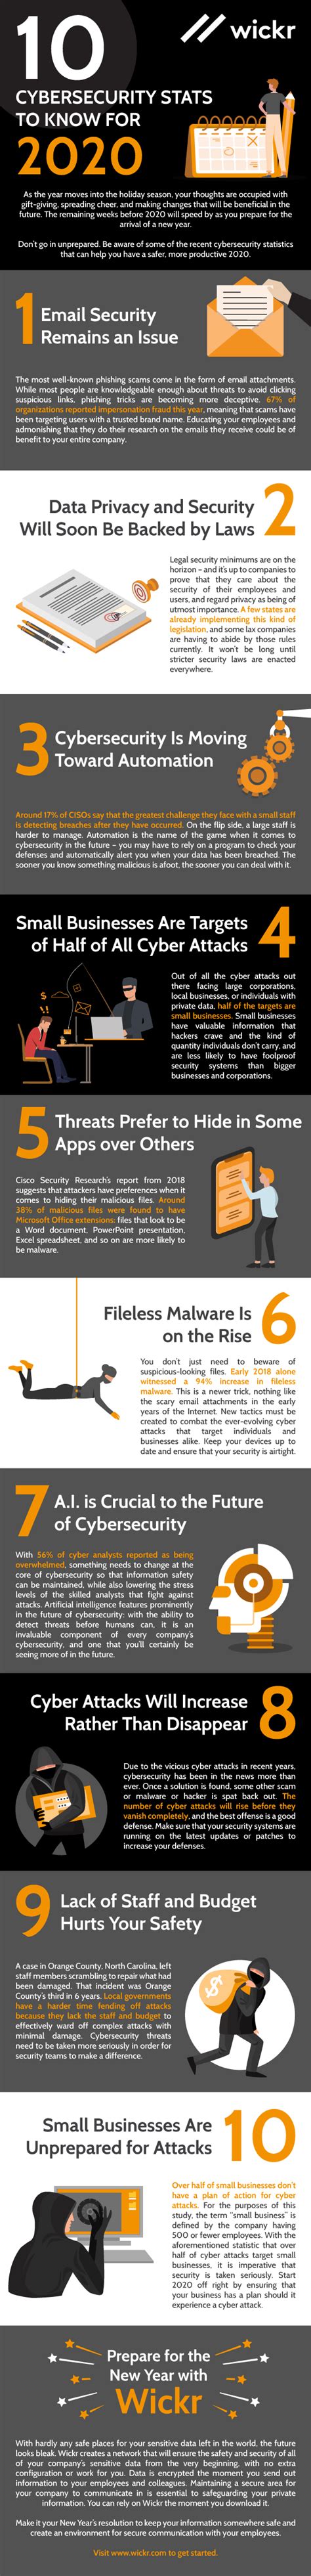 Cybersecurity Stats To Know For Infographic Aws Wickr